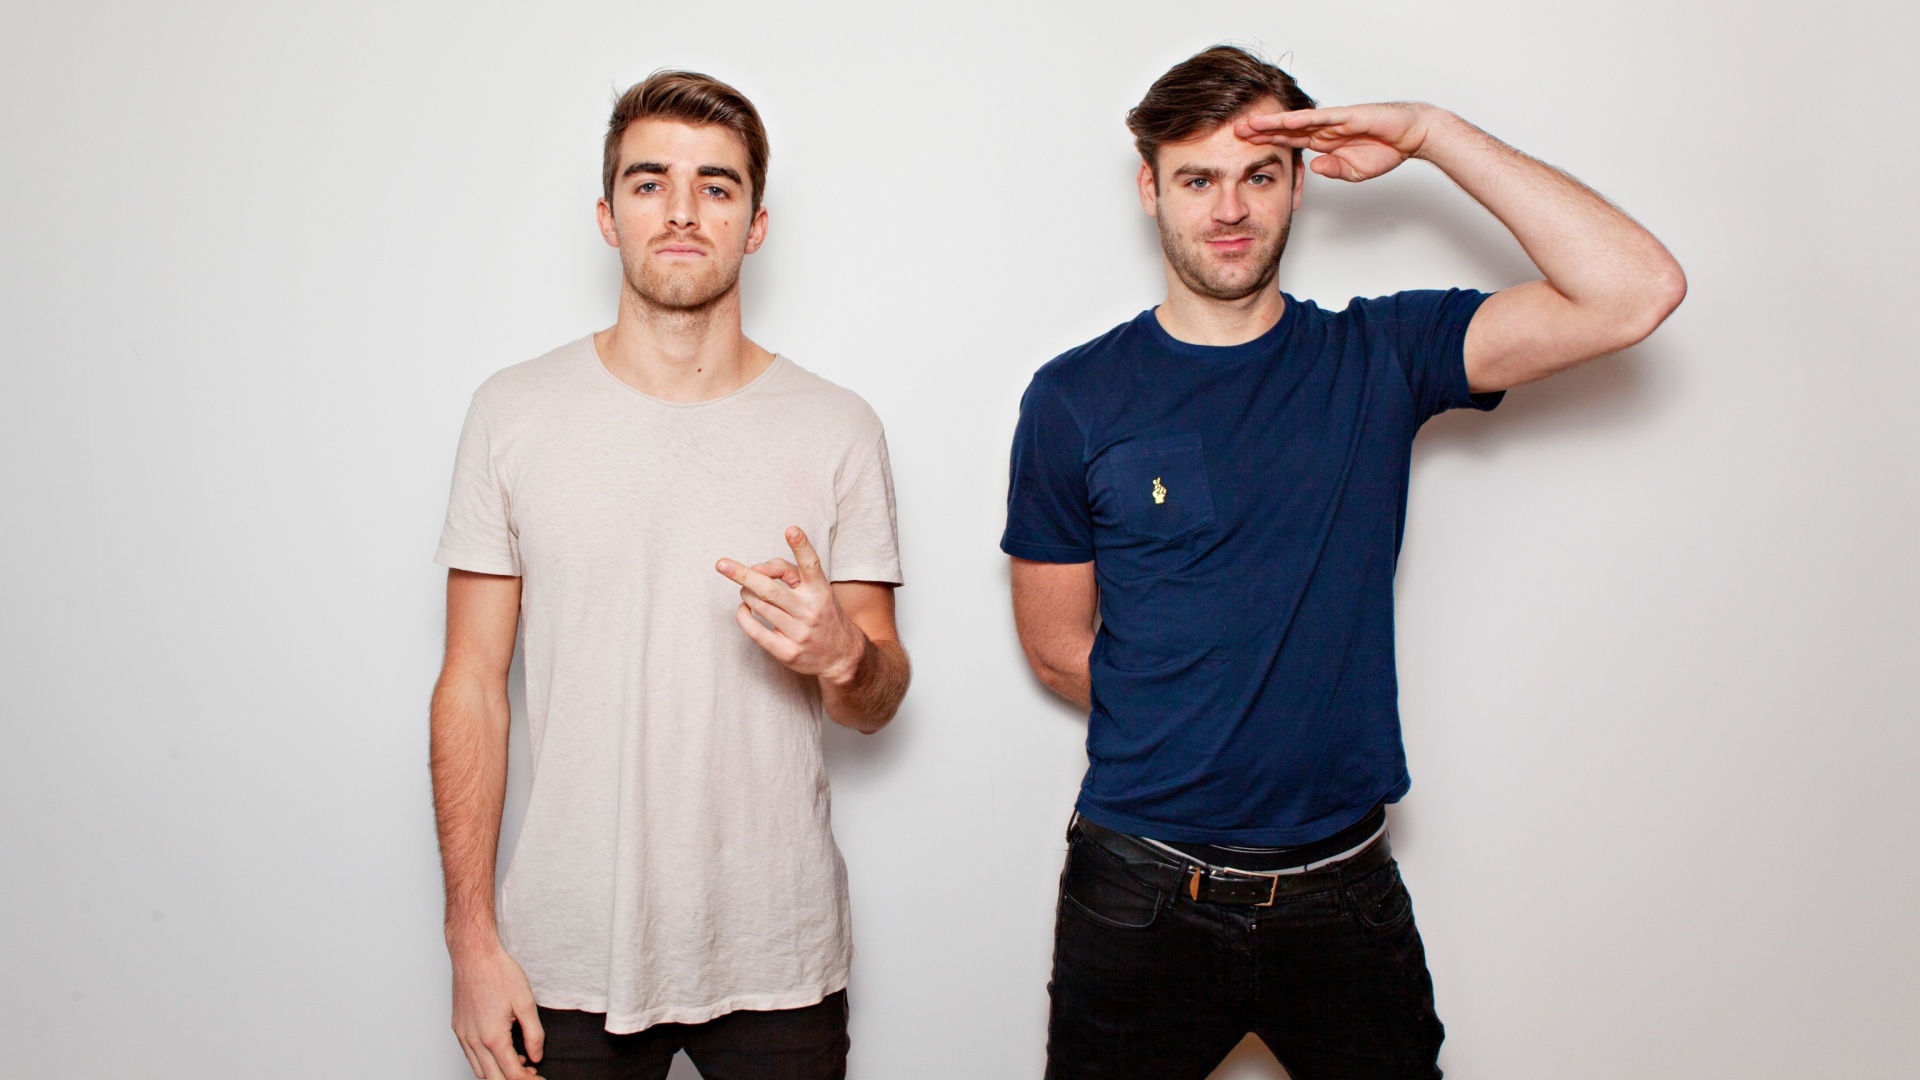 The Chainsmokers with Andrew Taggart and Alex Pall screenshot #1 1920x1080